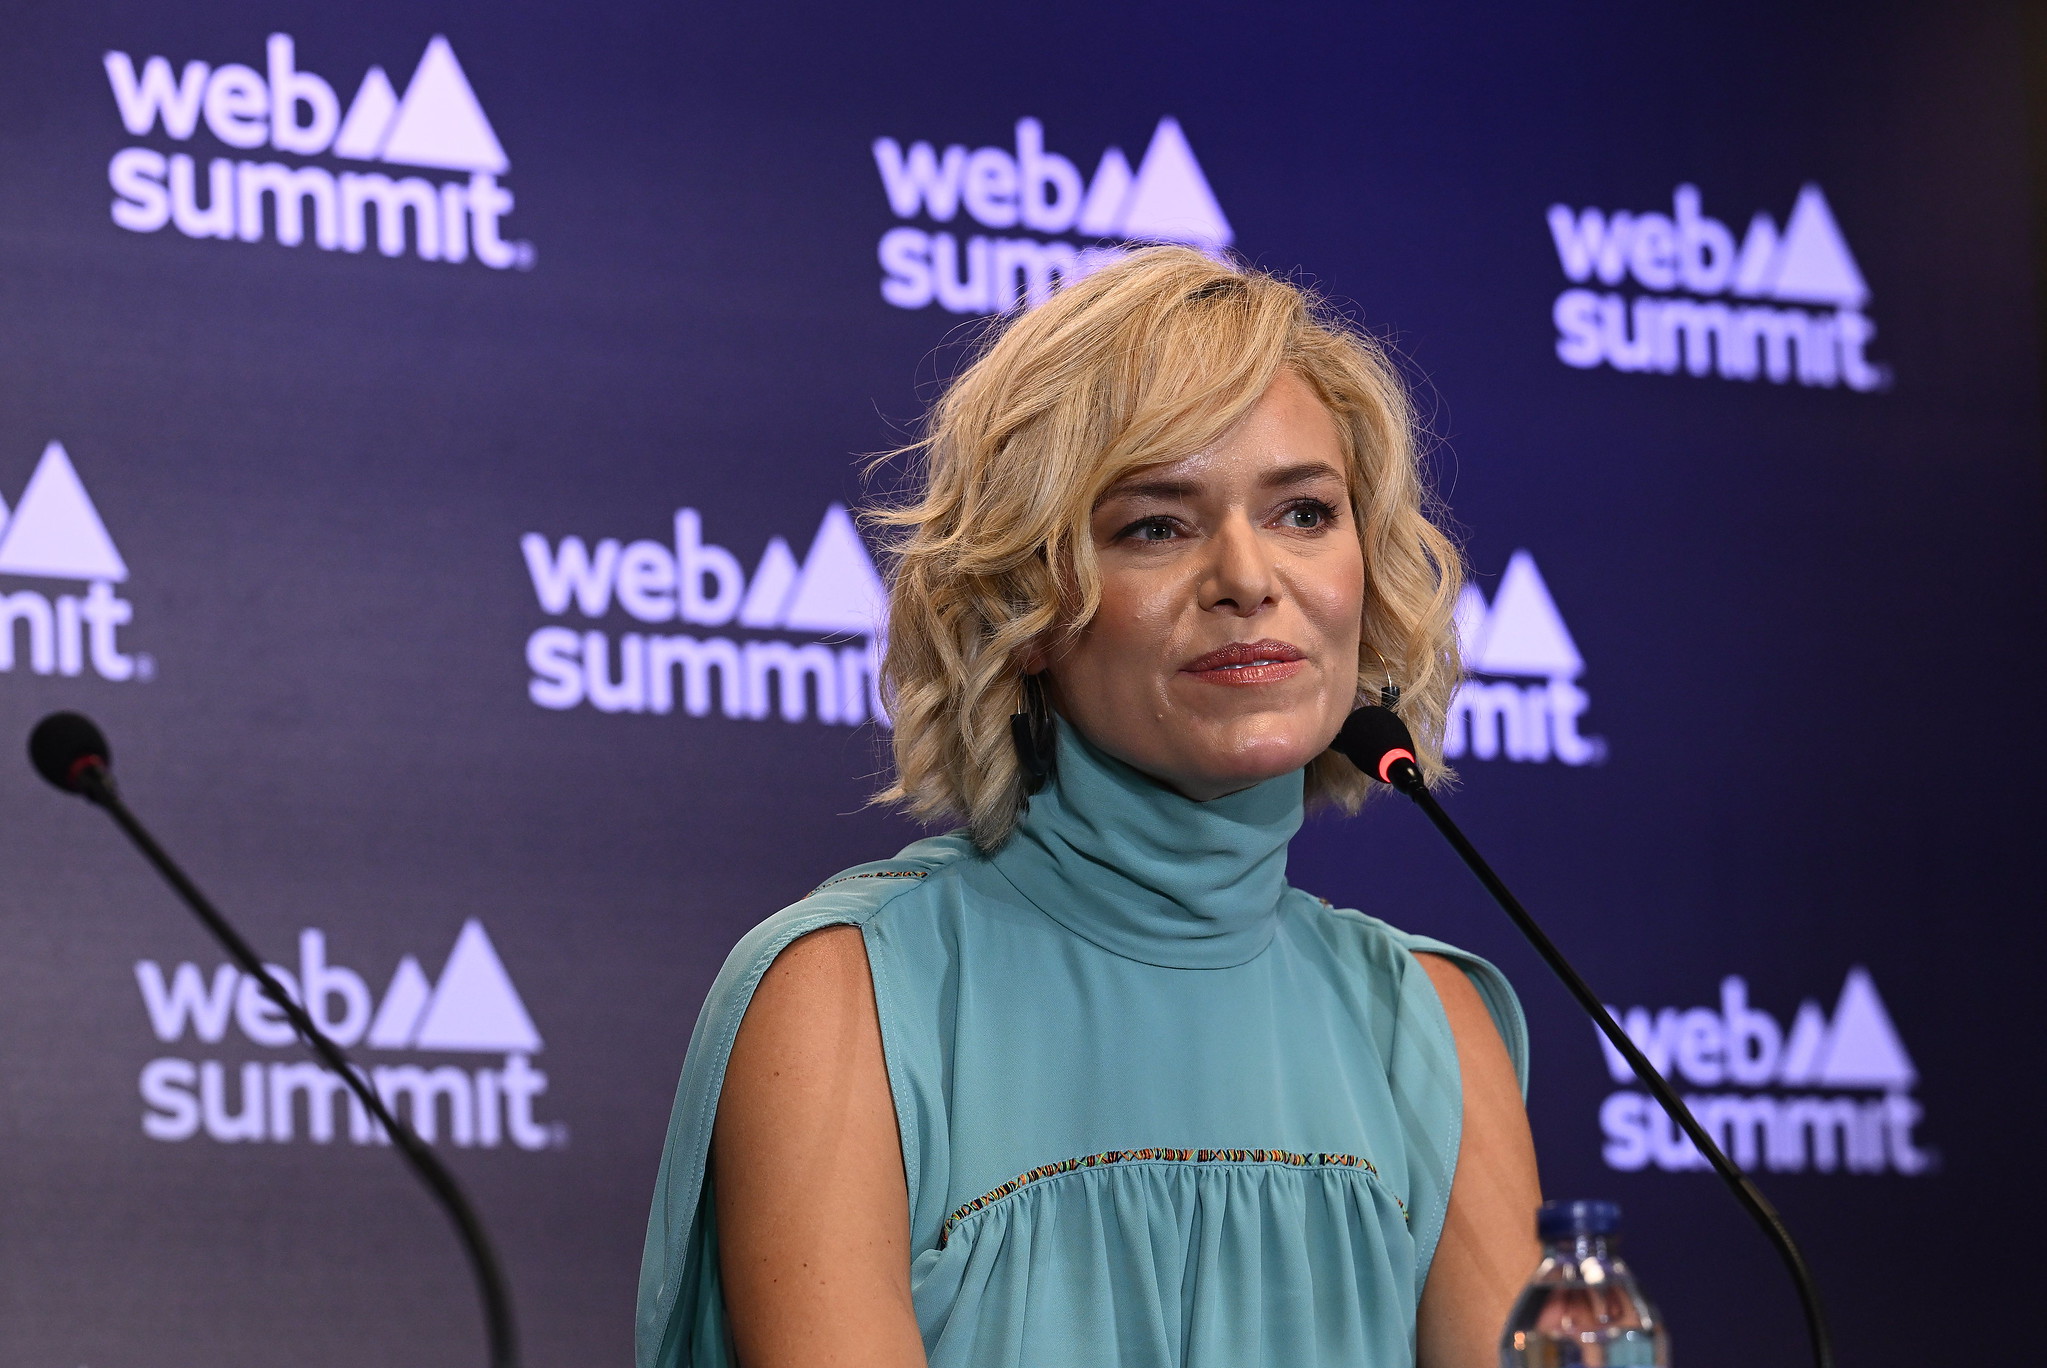 A person (Web Summit CEO Katherine Maher) pictured in front of a wall that features the Web Summit logo prominently in several places. Katherine is seated behind a small microphone. This is a press conference at Web Summit 2023 in Lisbon.